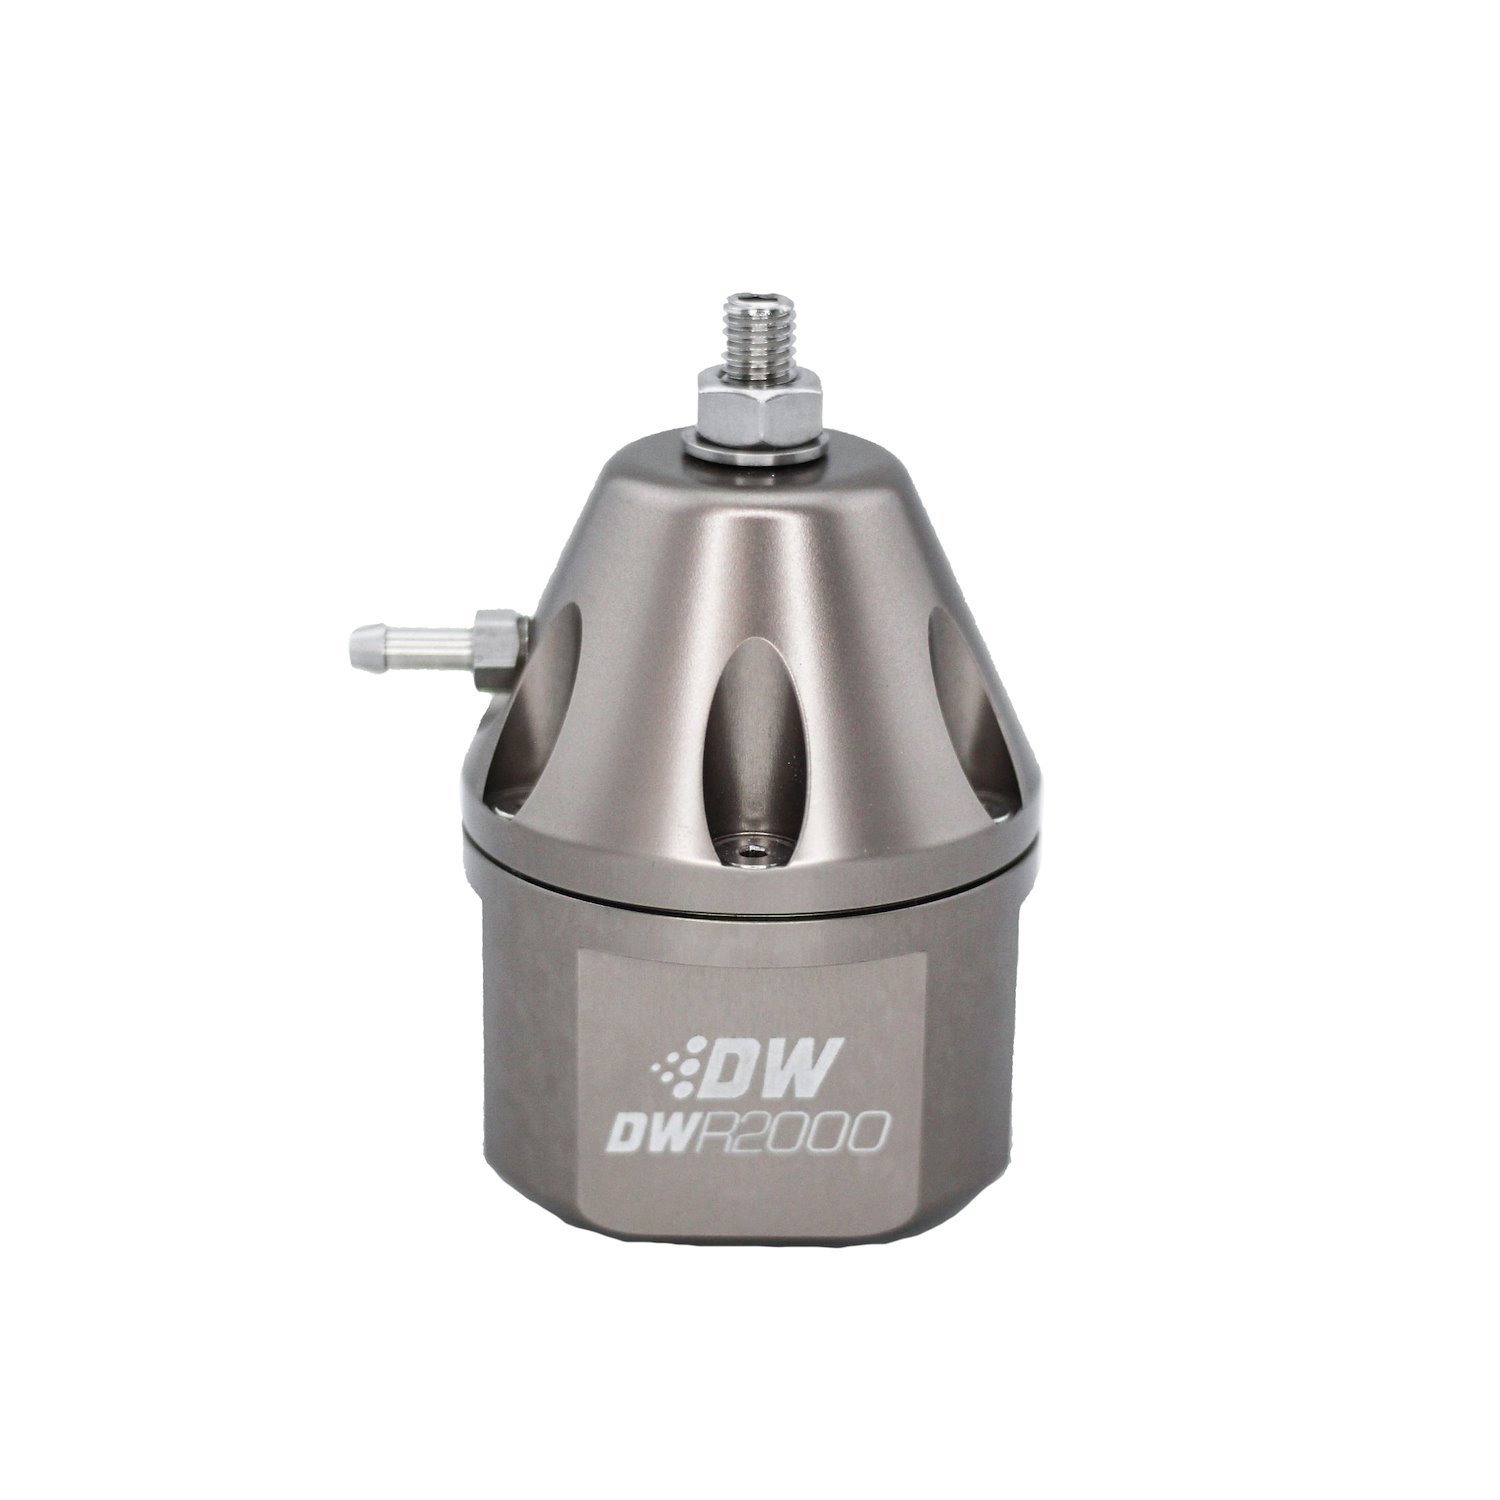 62000FRT DWR2000 adjustable fuel pressure regulator anodized titanium. Dual -10AN inlet and -8AN outlet. Universal fitment